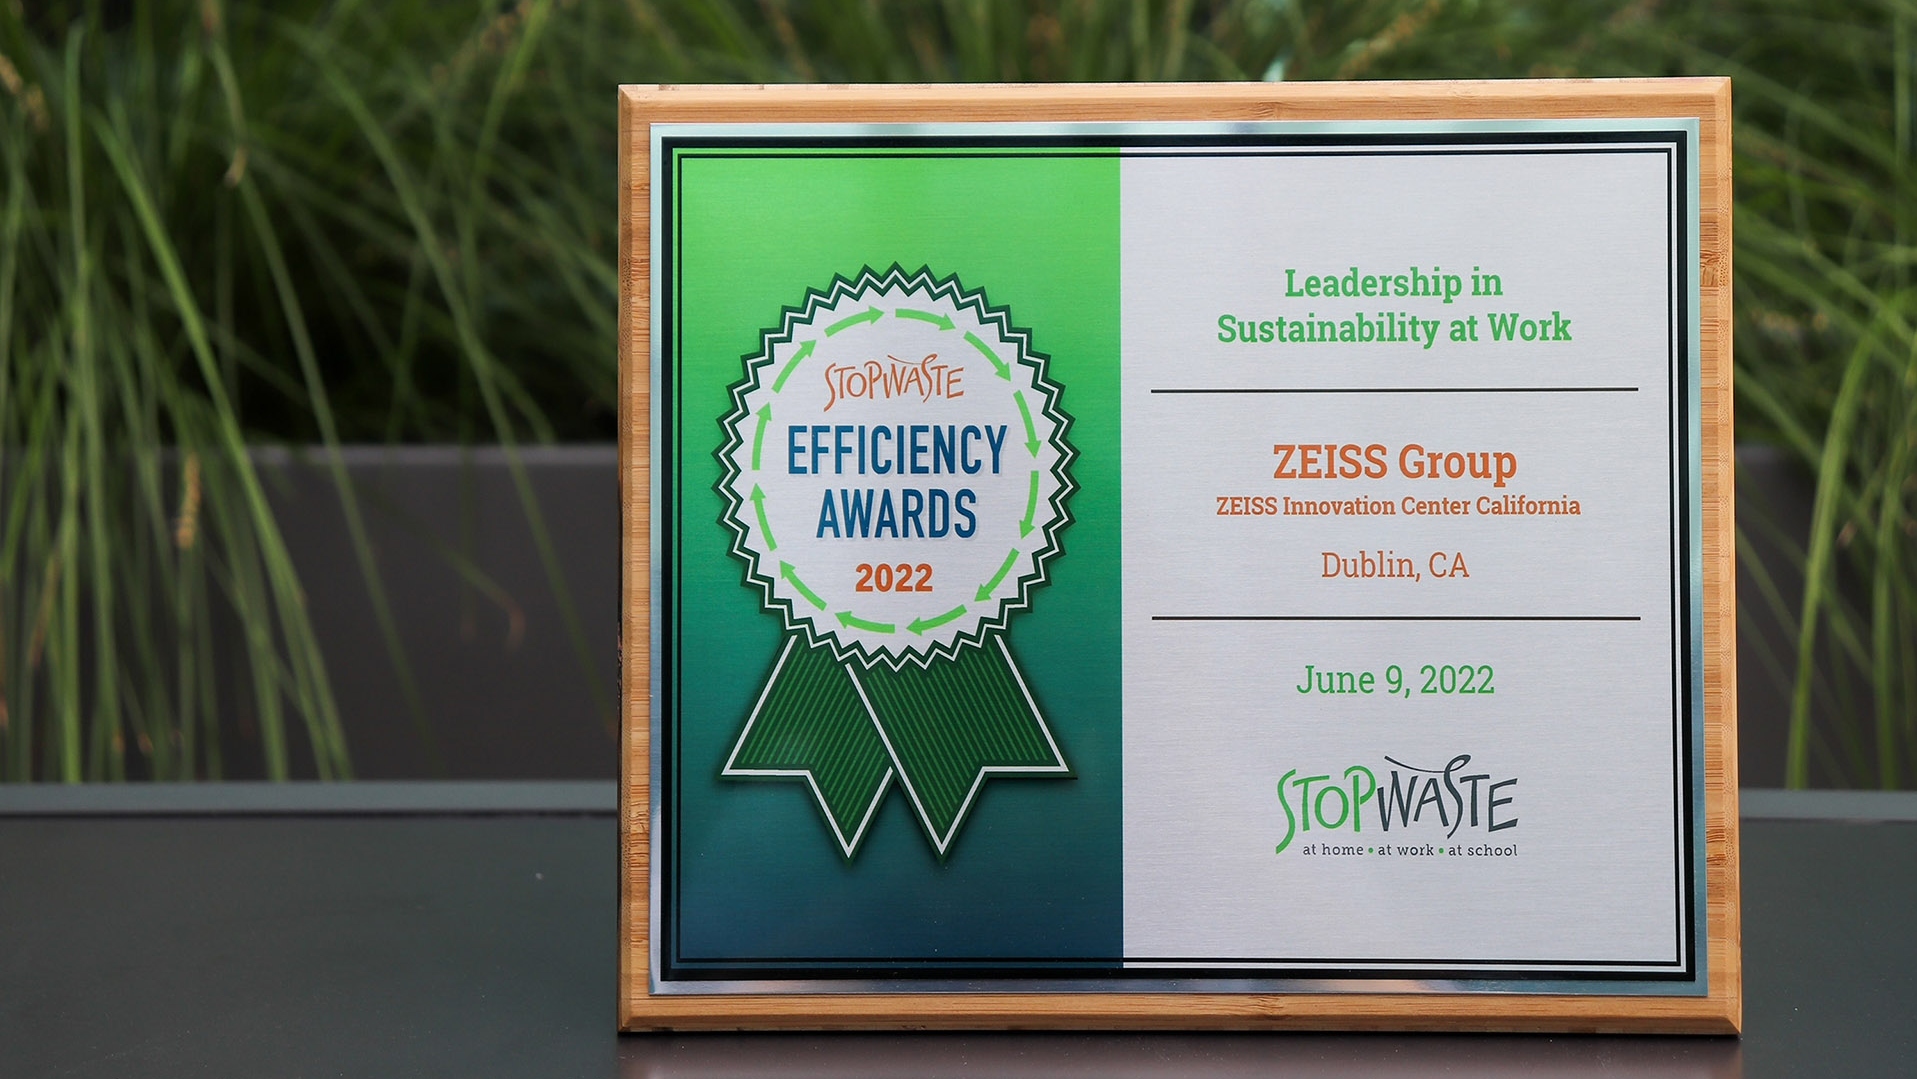 Leadership in Sustainability at Work